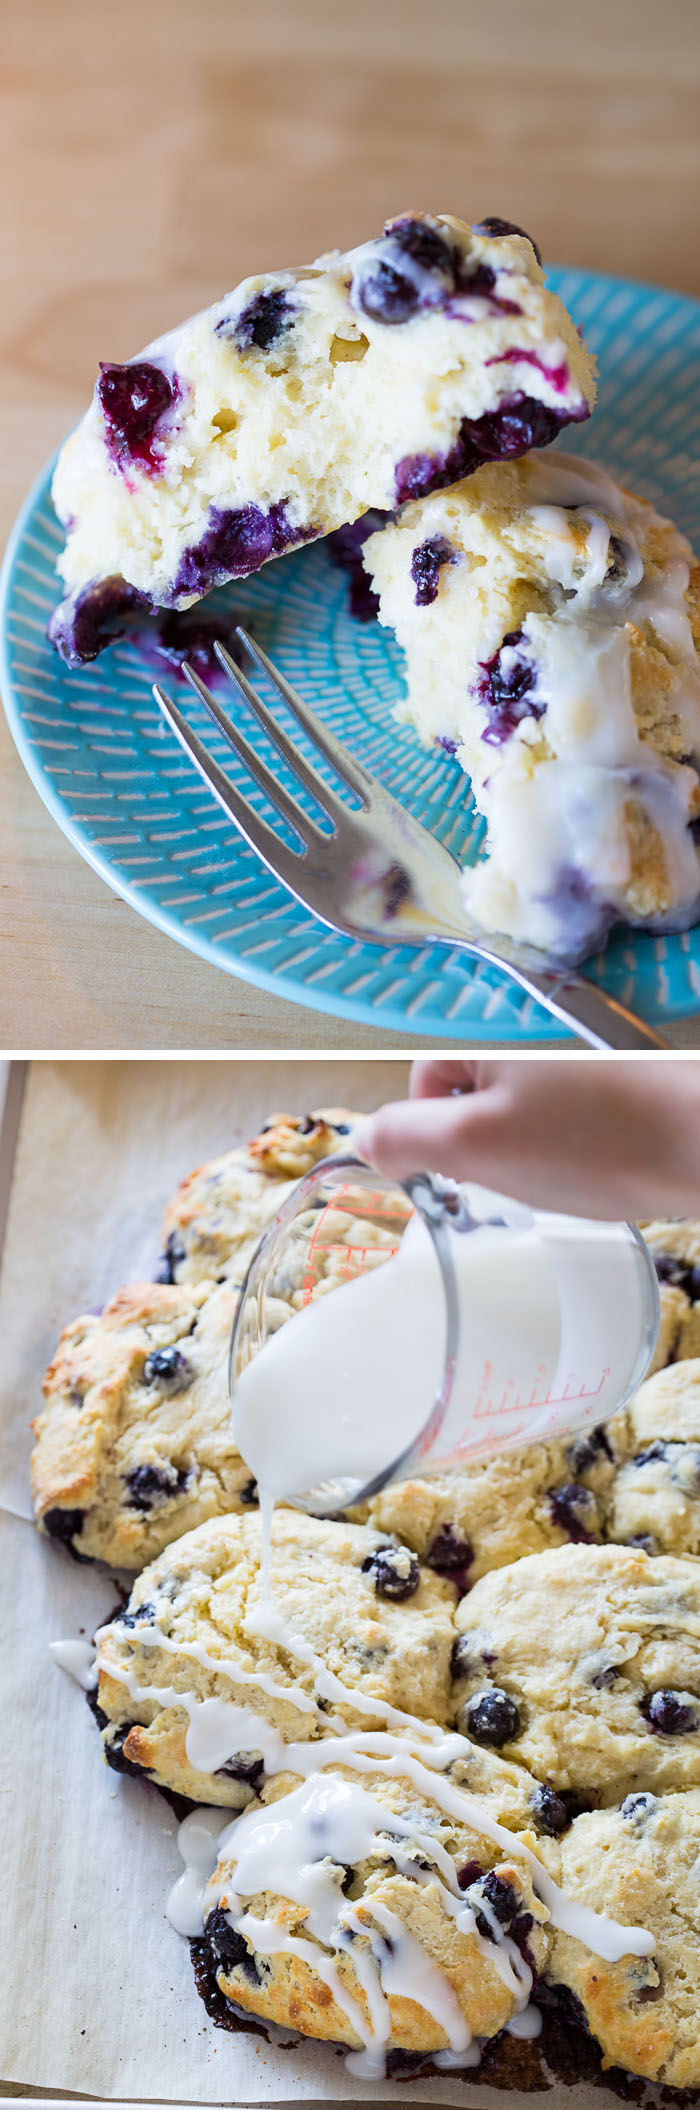 Blueberry Biscuits with Almond Glaze